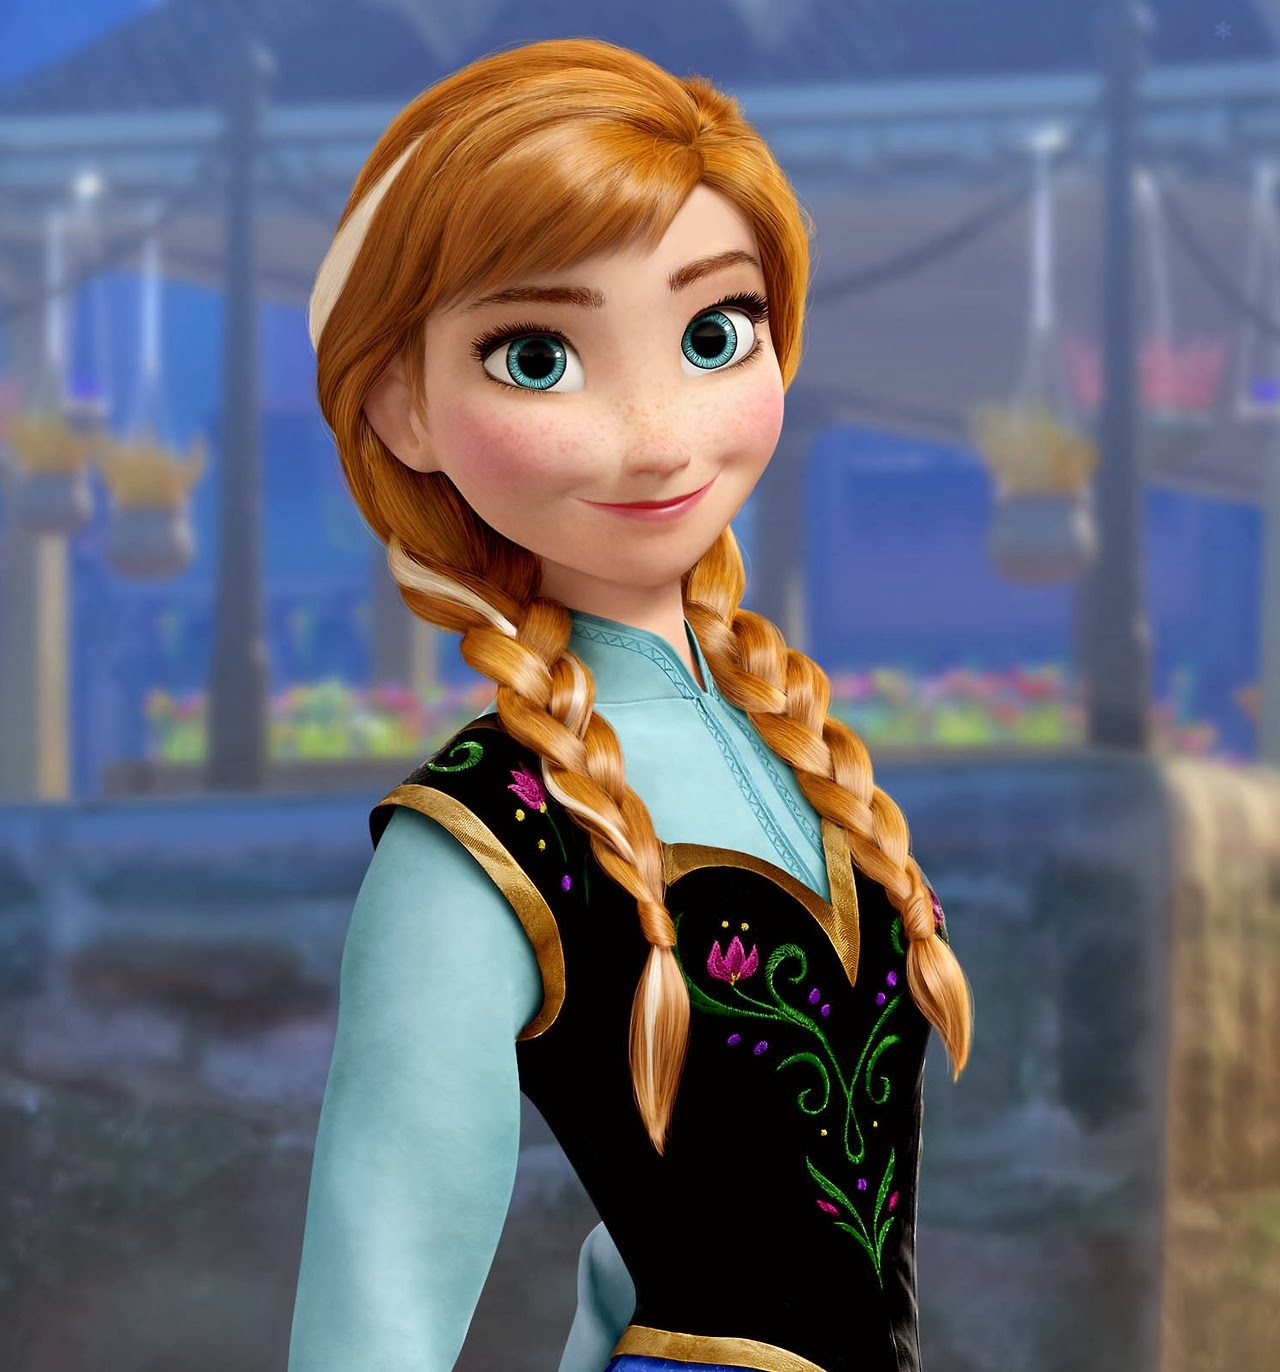 What Is Anna S Phone Number From Frozen